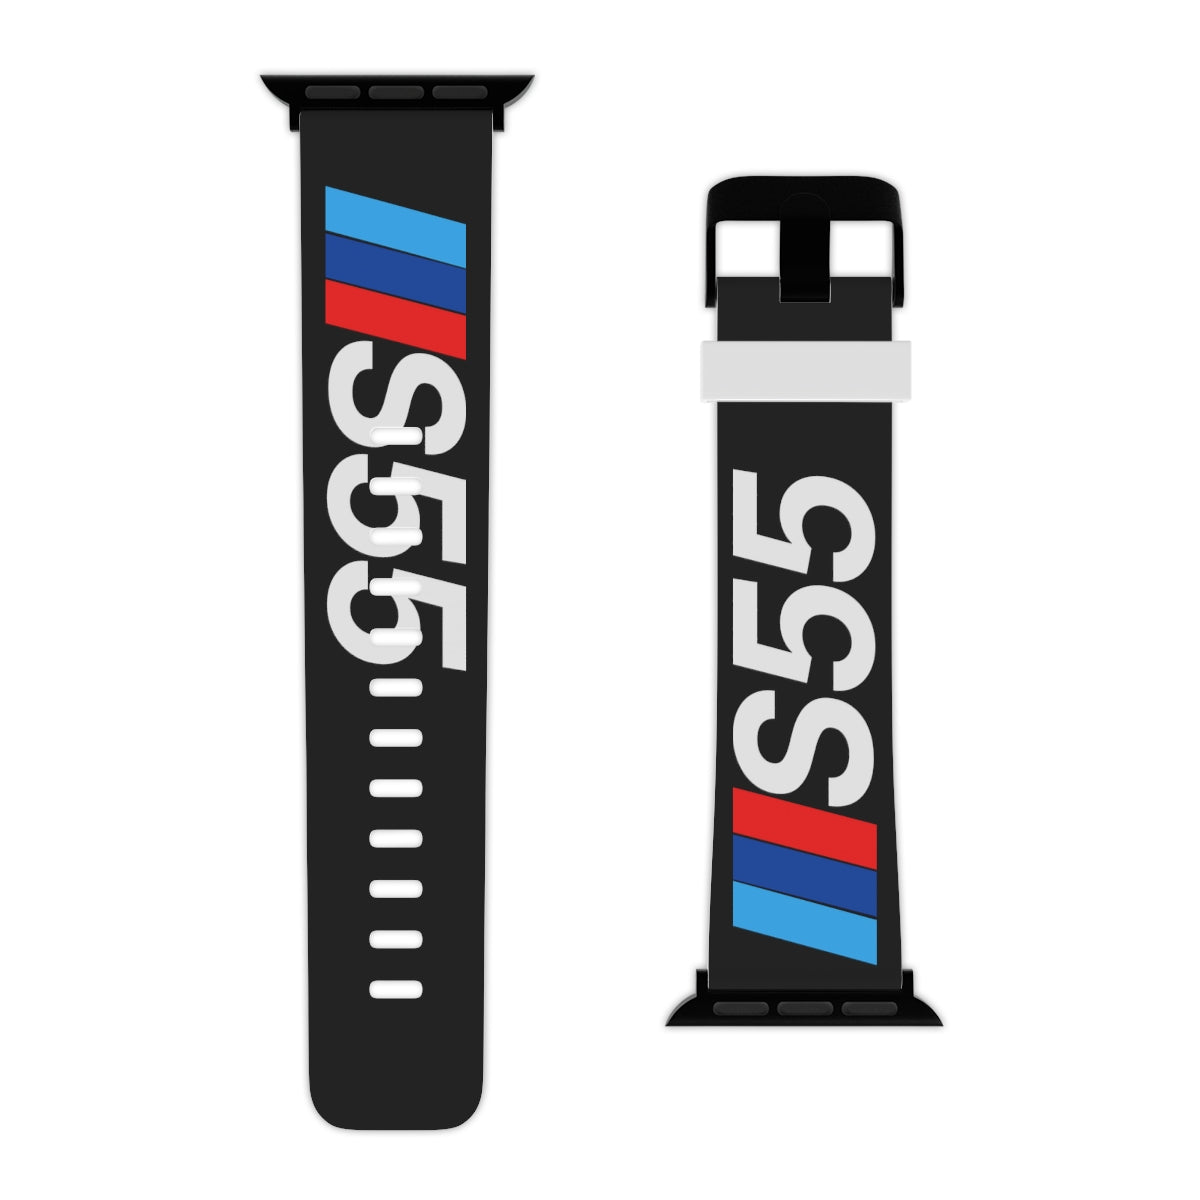 Powered By S55 Apple Watch Band - Black